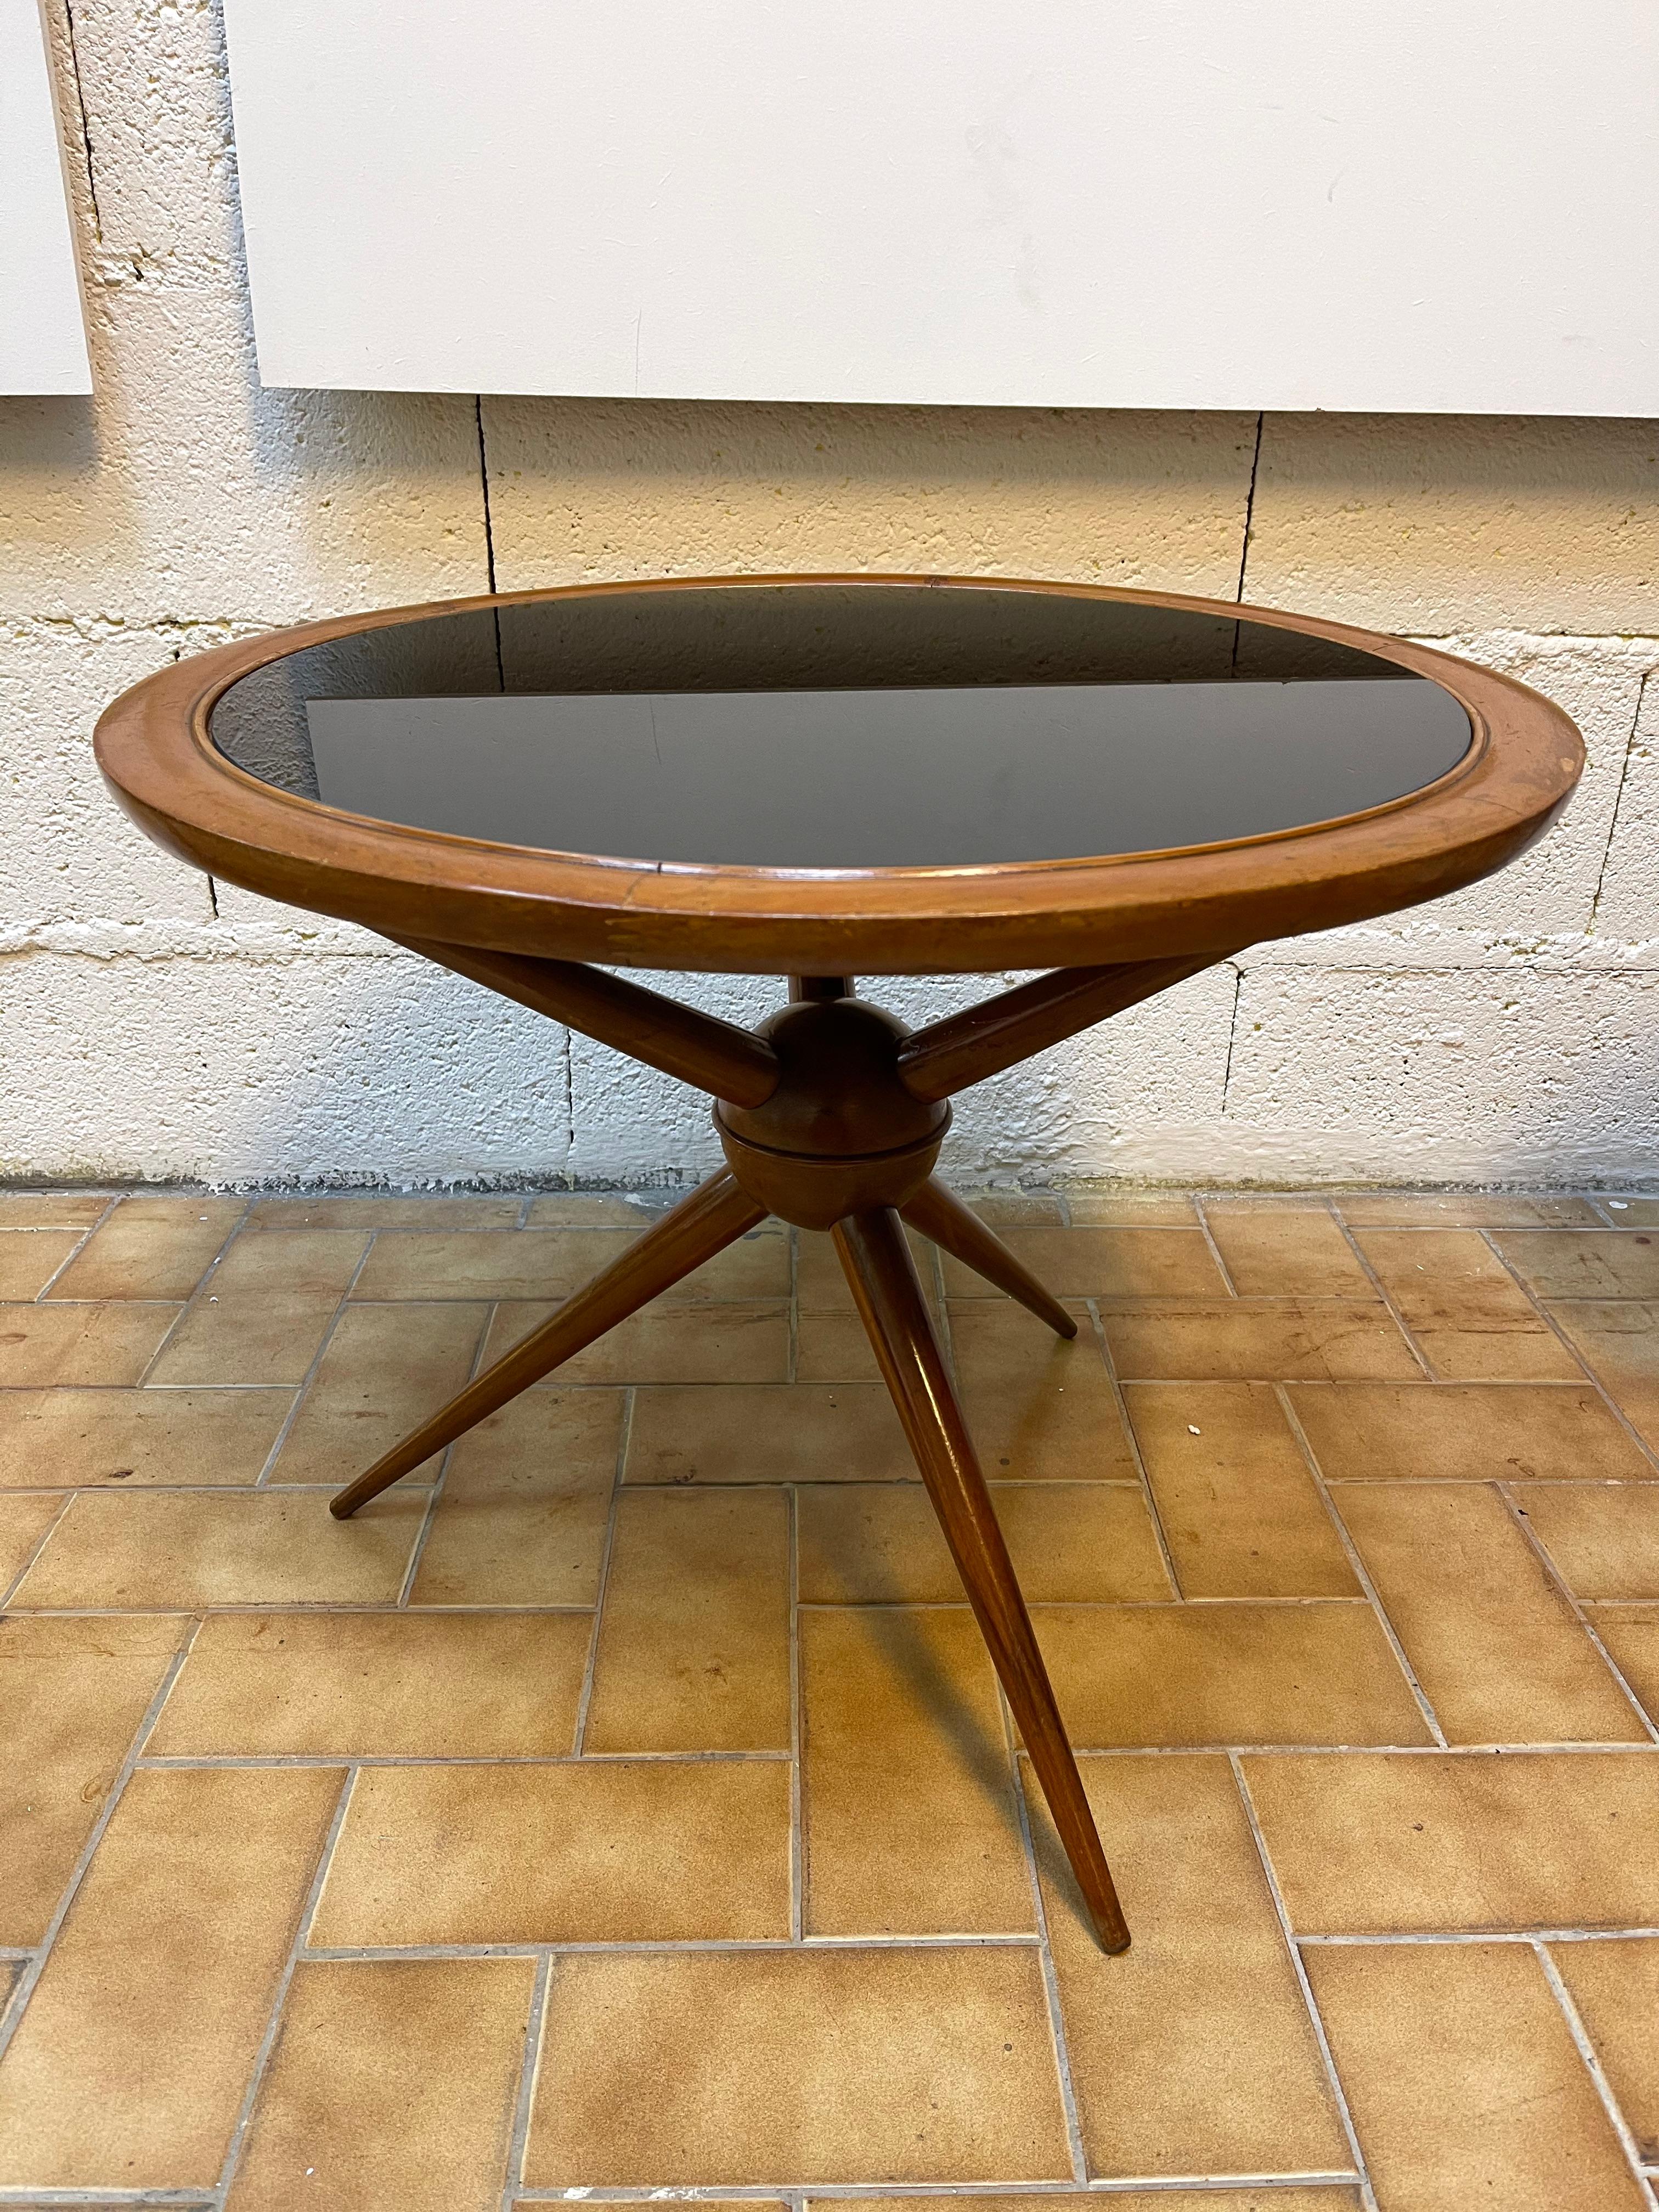 Italian Mid Century Wood and Opaline Glass Coffee Table, Italy, 1950s For Sale 2